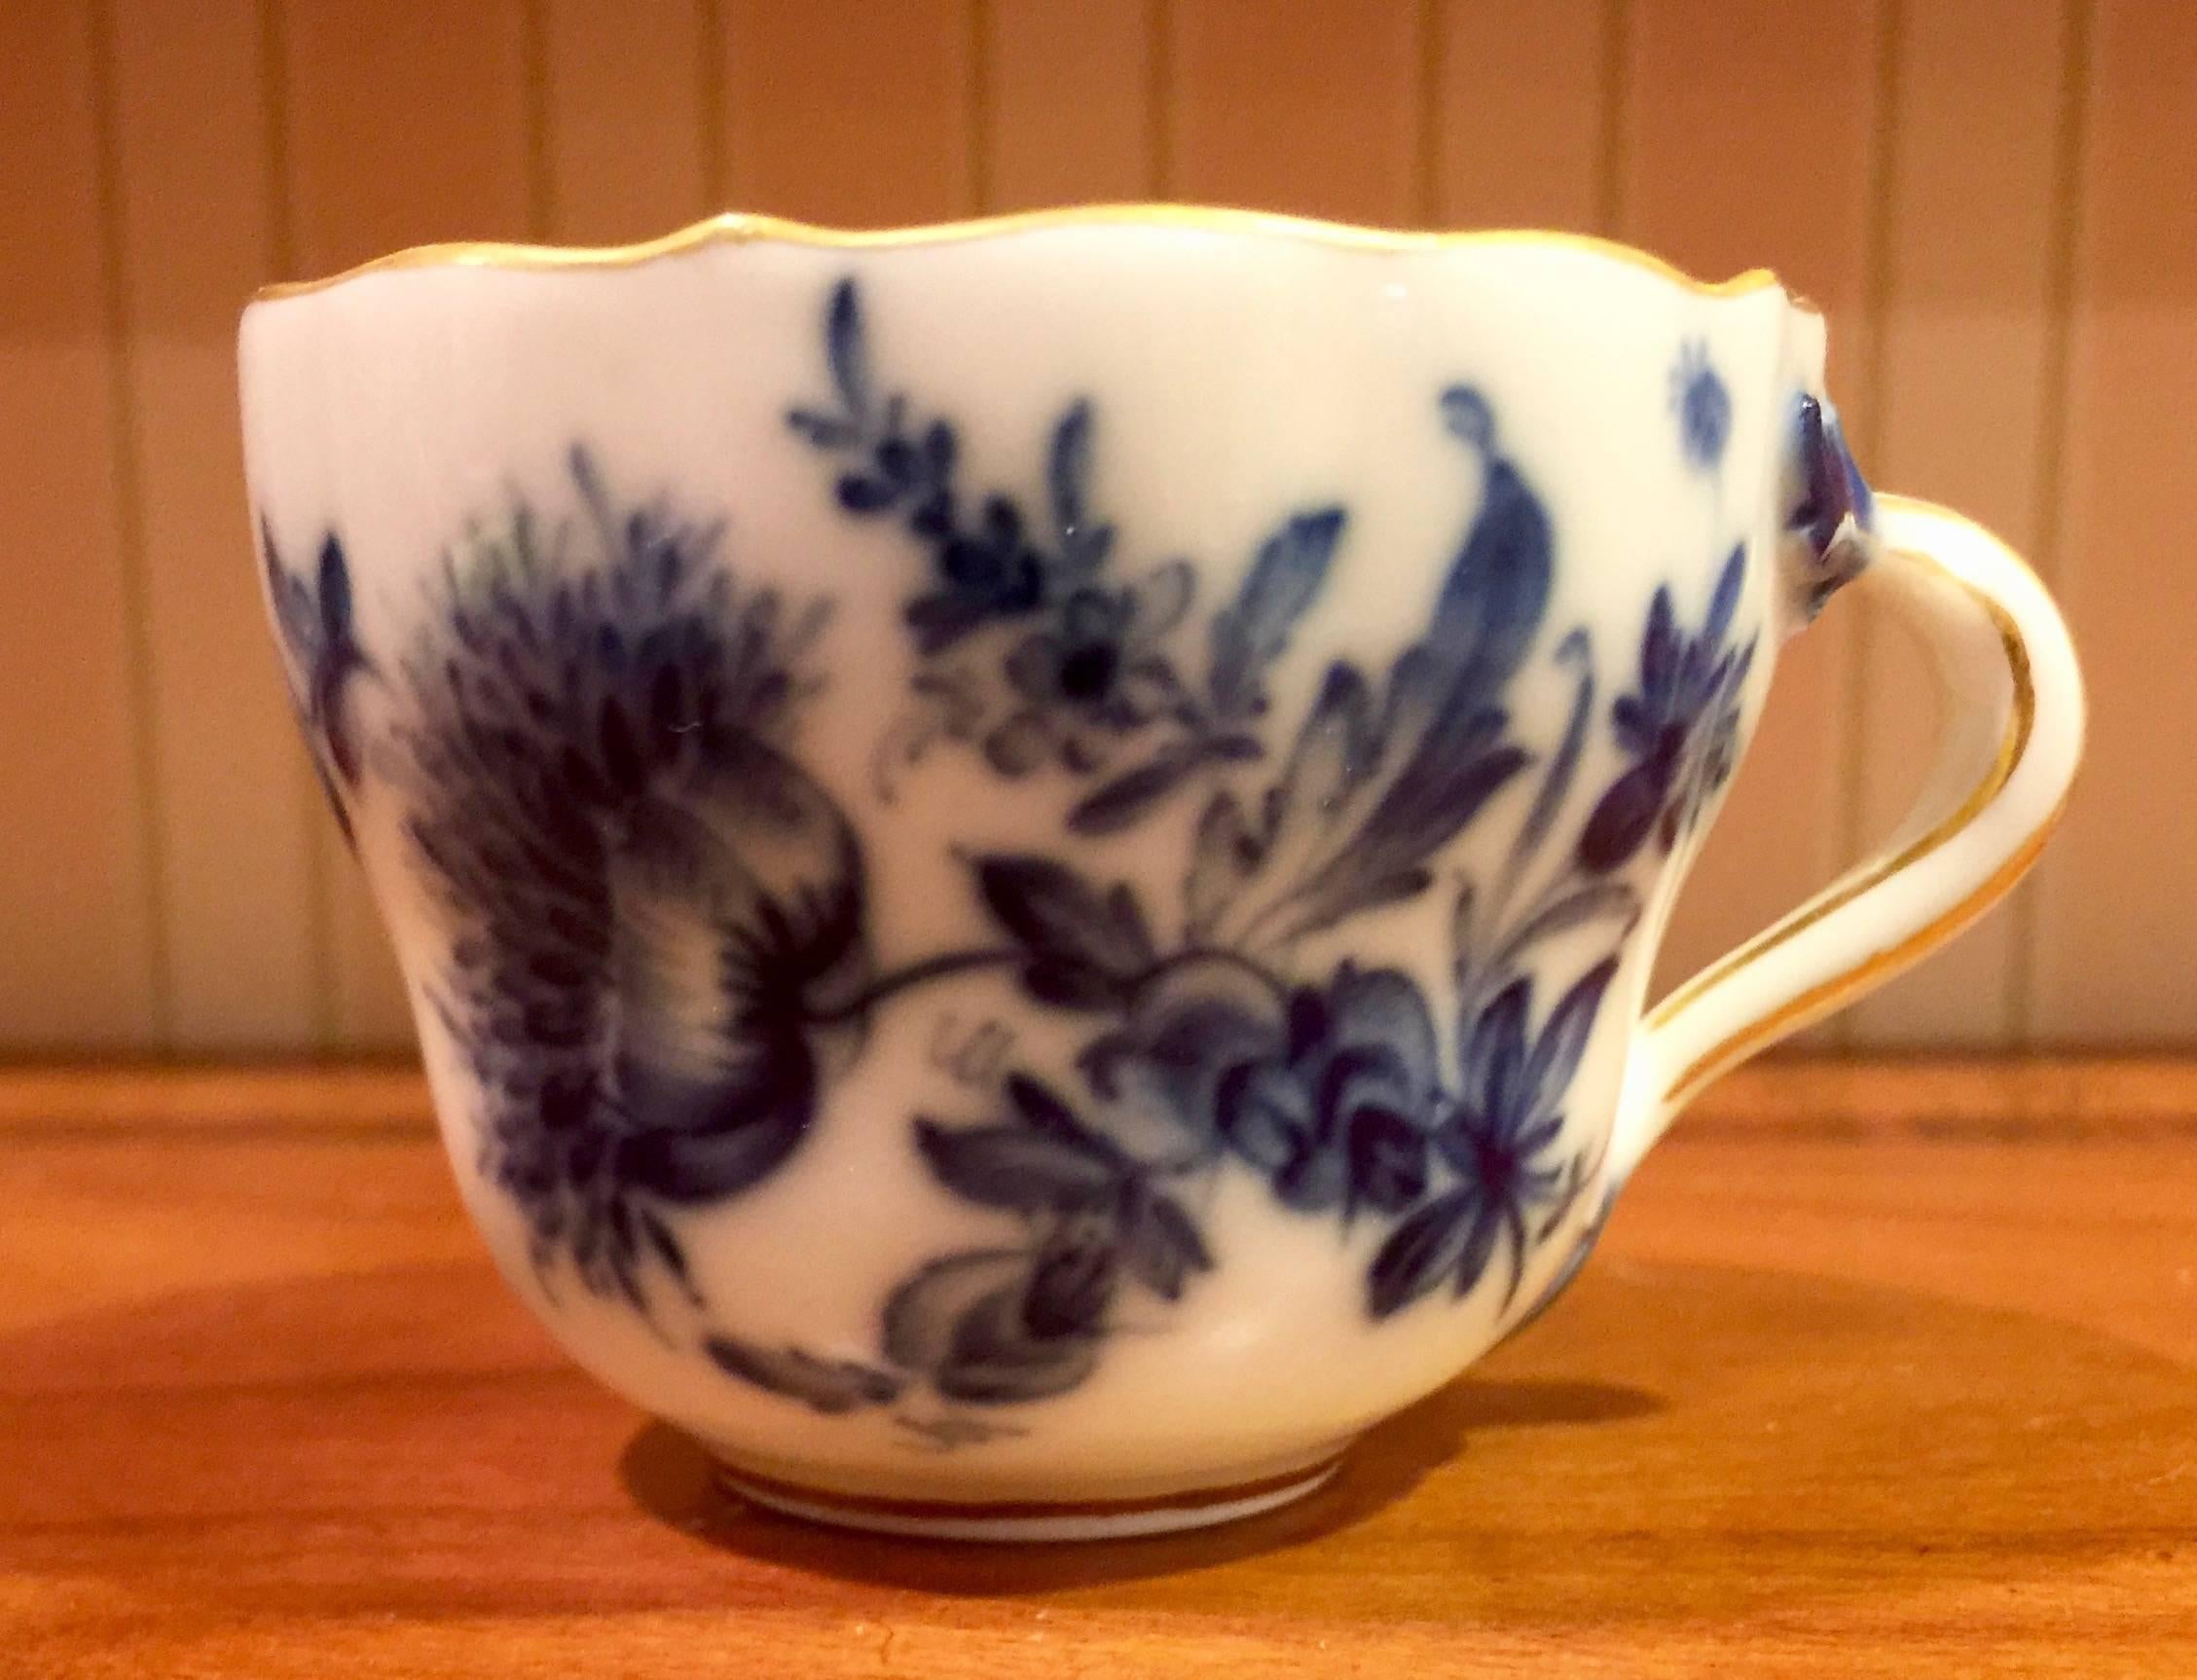 19th Century German Meissen Porcelain Cup and Saucer In Excellent Condition For Sale In Washington Crossing, PA